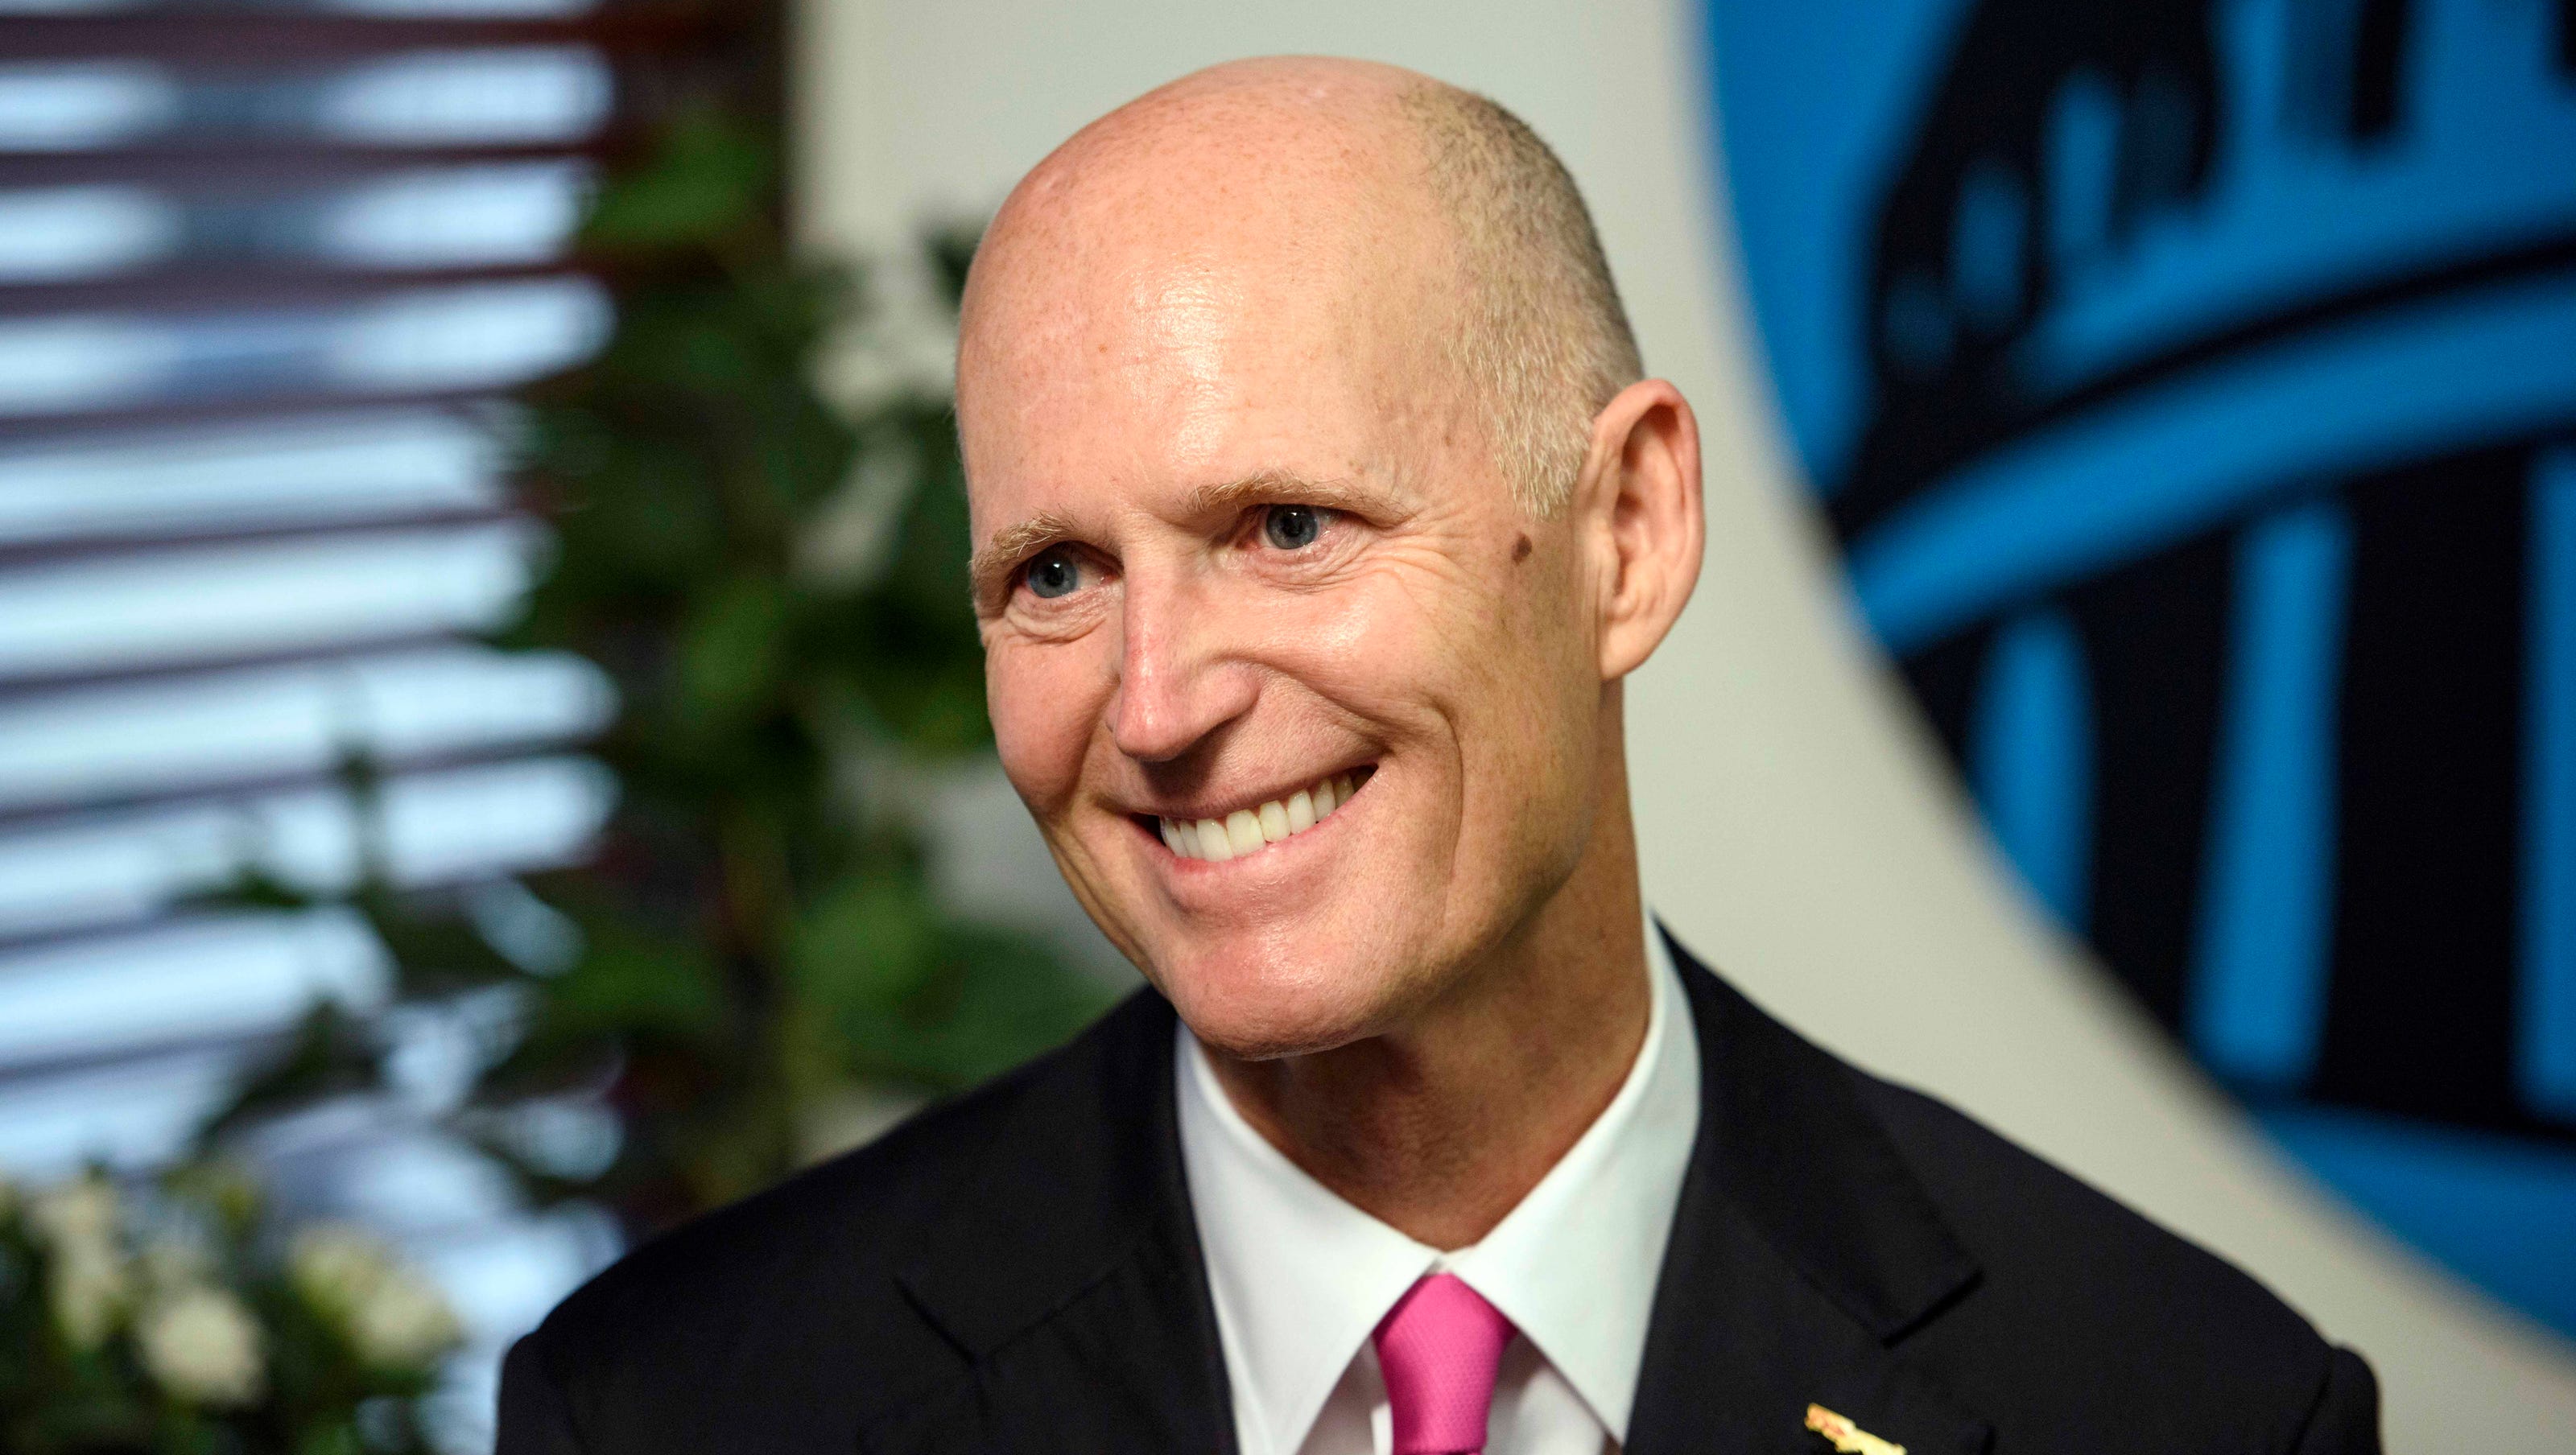 Republicans cannot give up on health care: Rick Scott